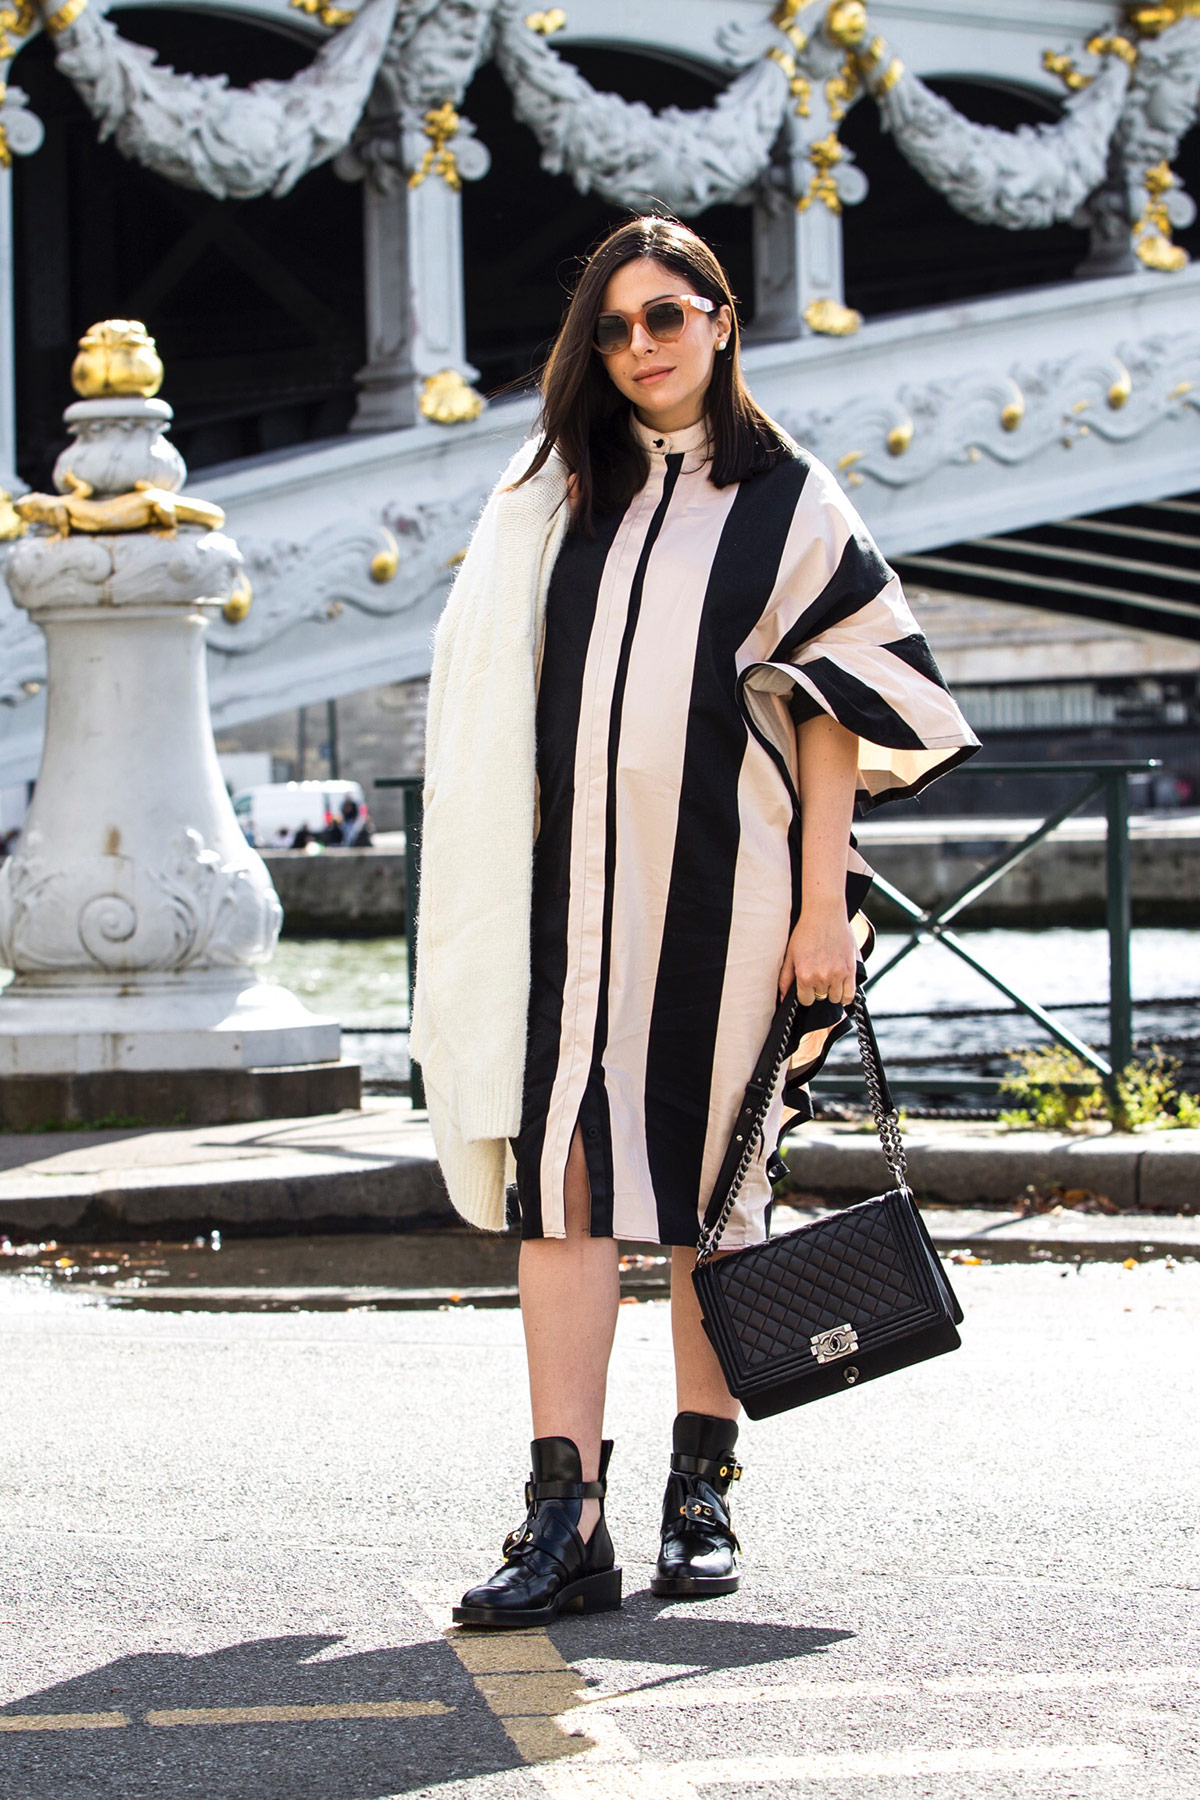 Stella Asteria wearing stripes and ruffles during Paris Fashion Week, with Chanel boy bag and Balenciaga combat boots - Paris Street Style Inspiration